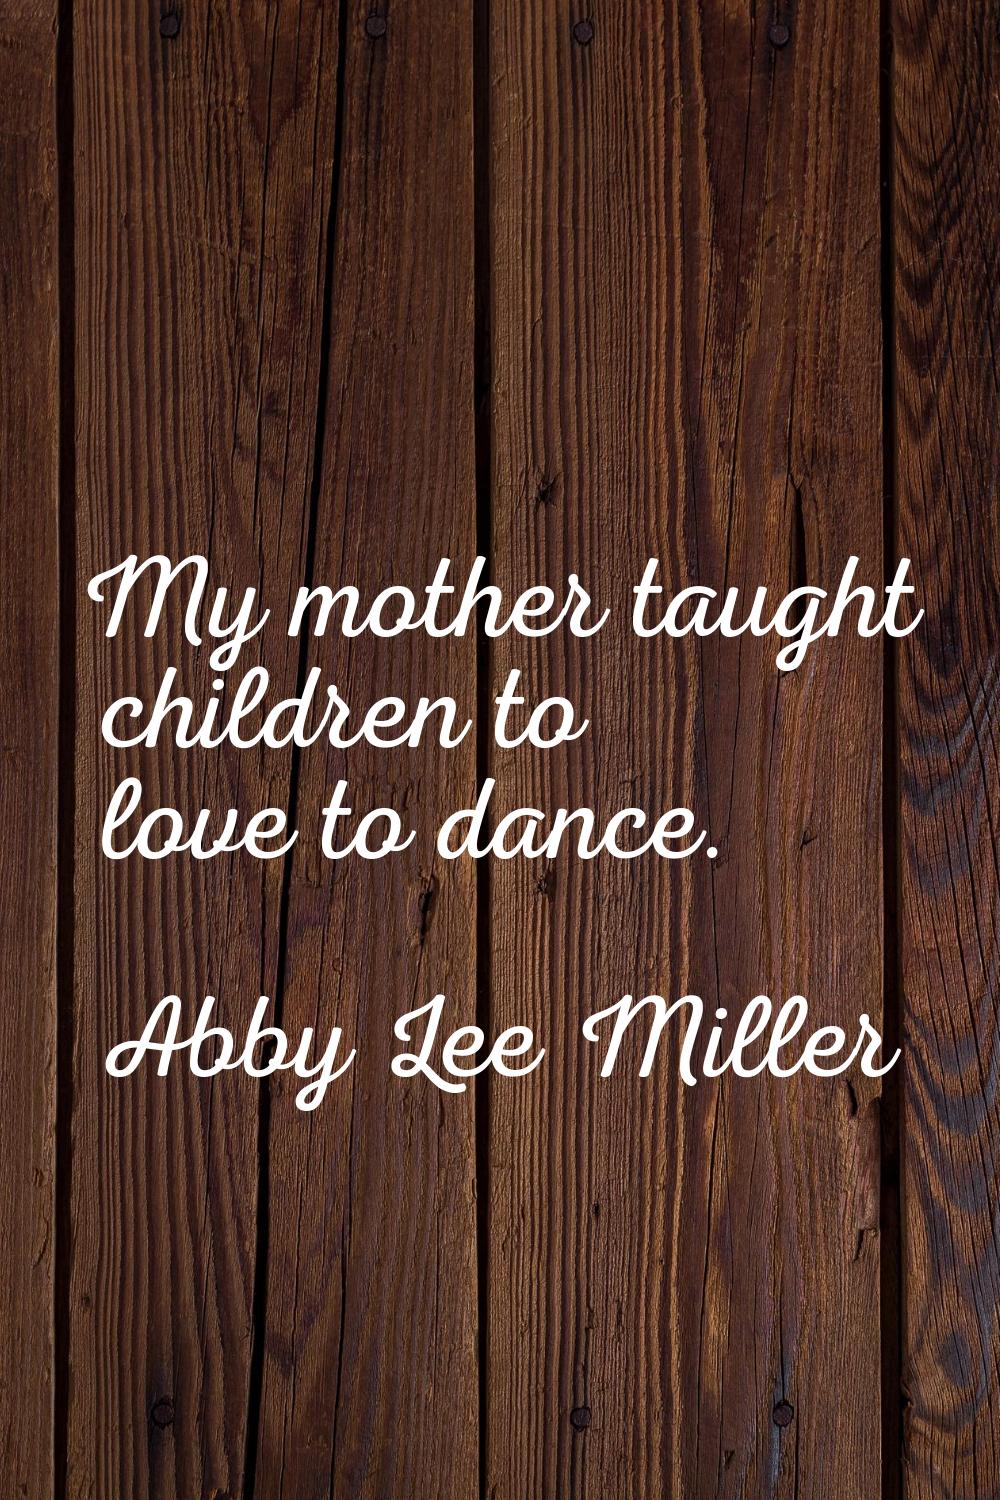 My mother taught children to love to dance.